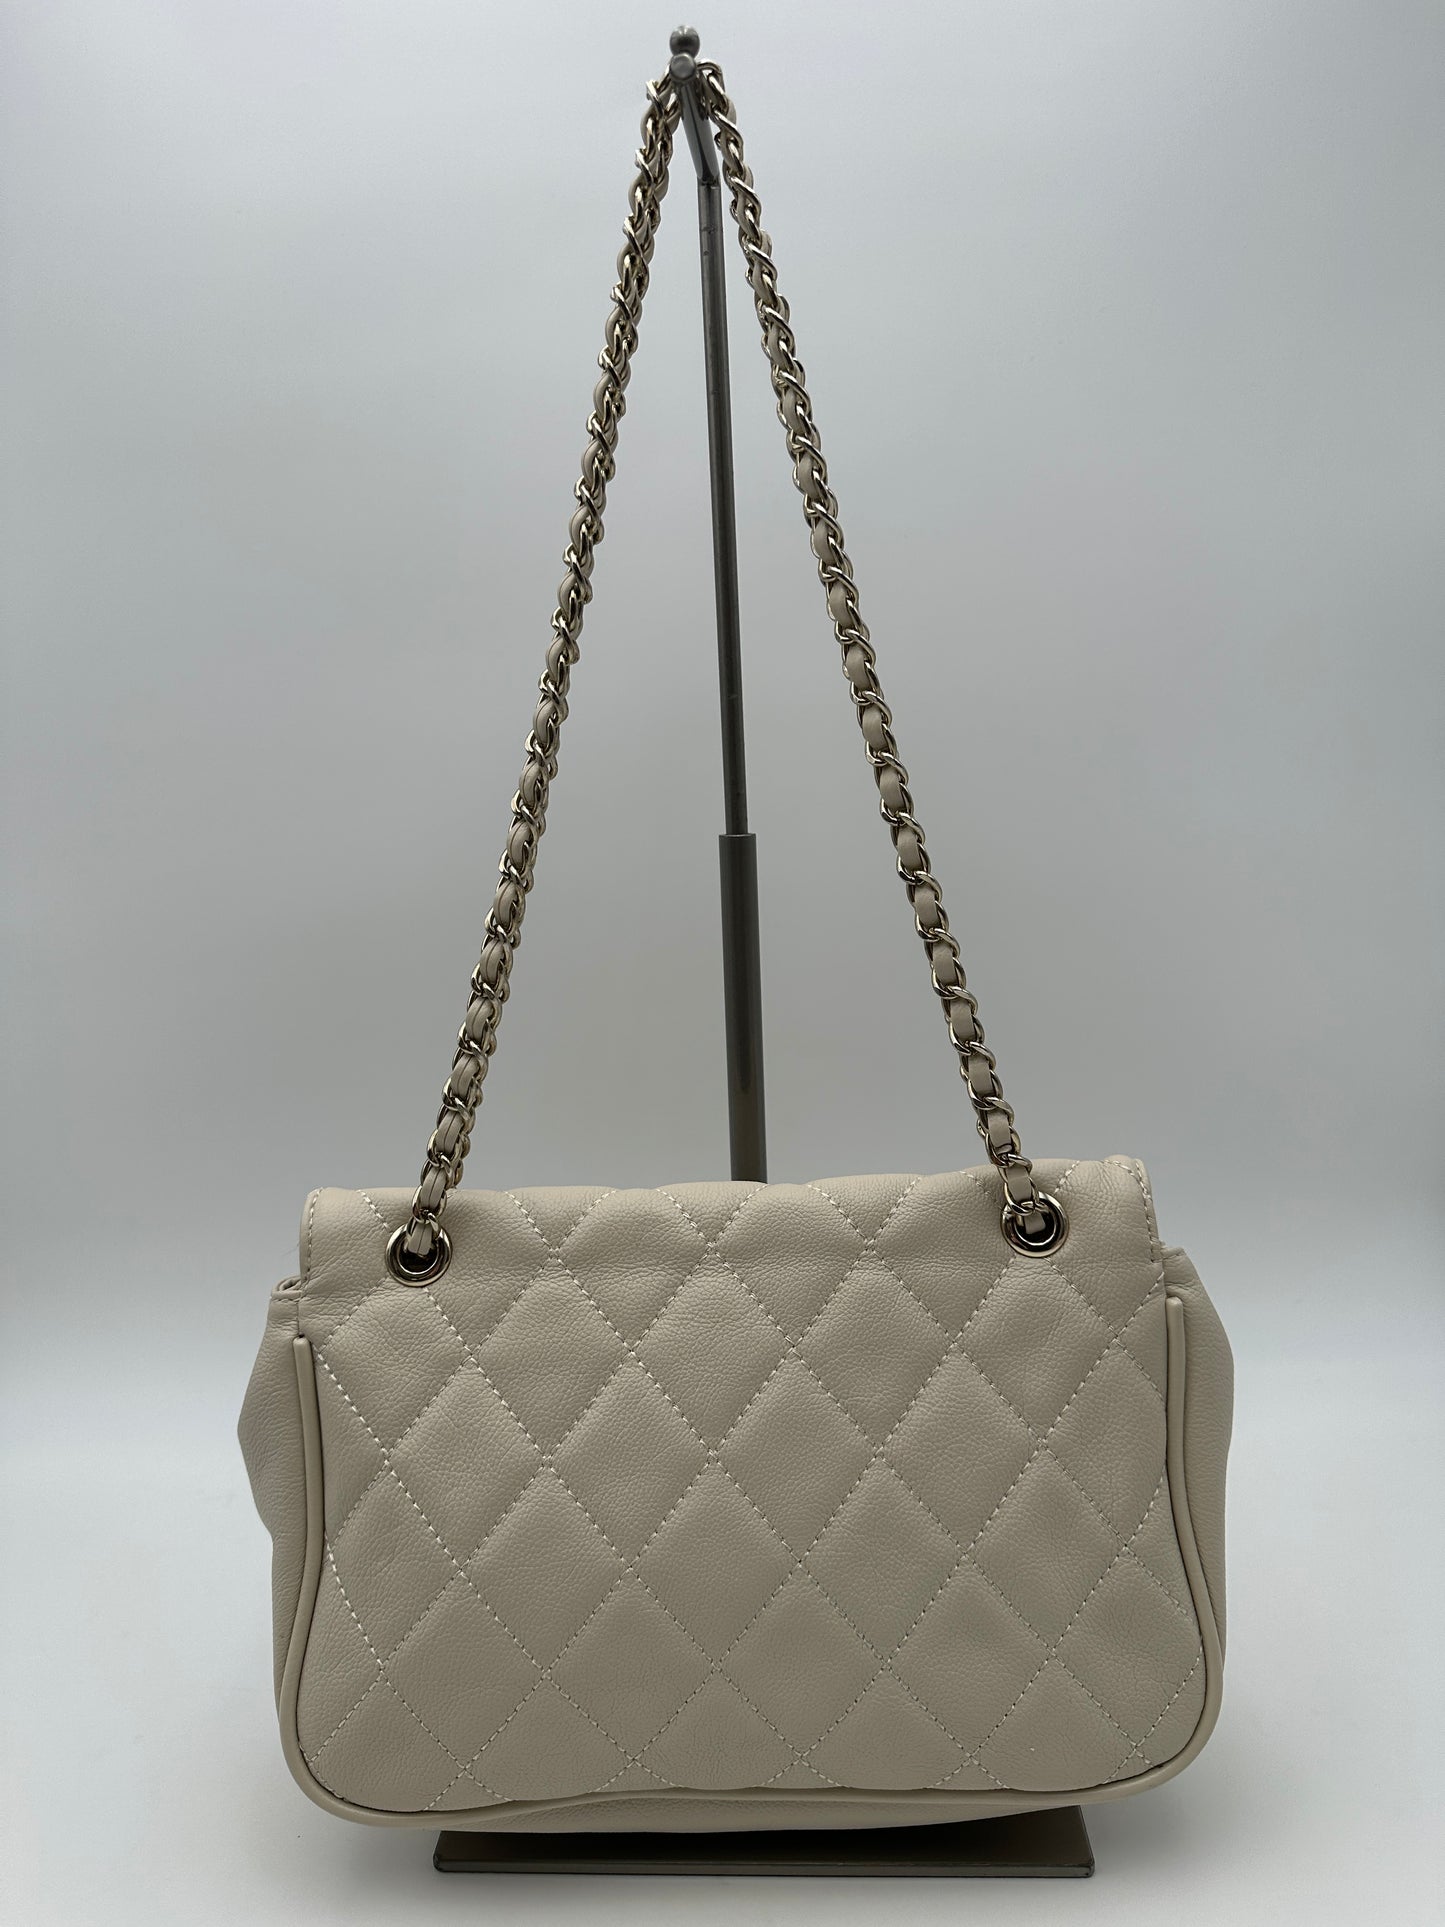 Aldo Off White Quilted Handbag Purse with Fold Over Flap and Chain Handle Strap